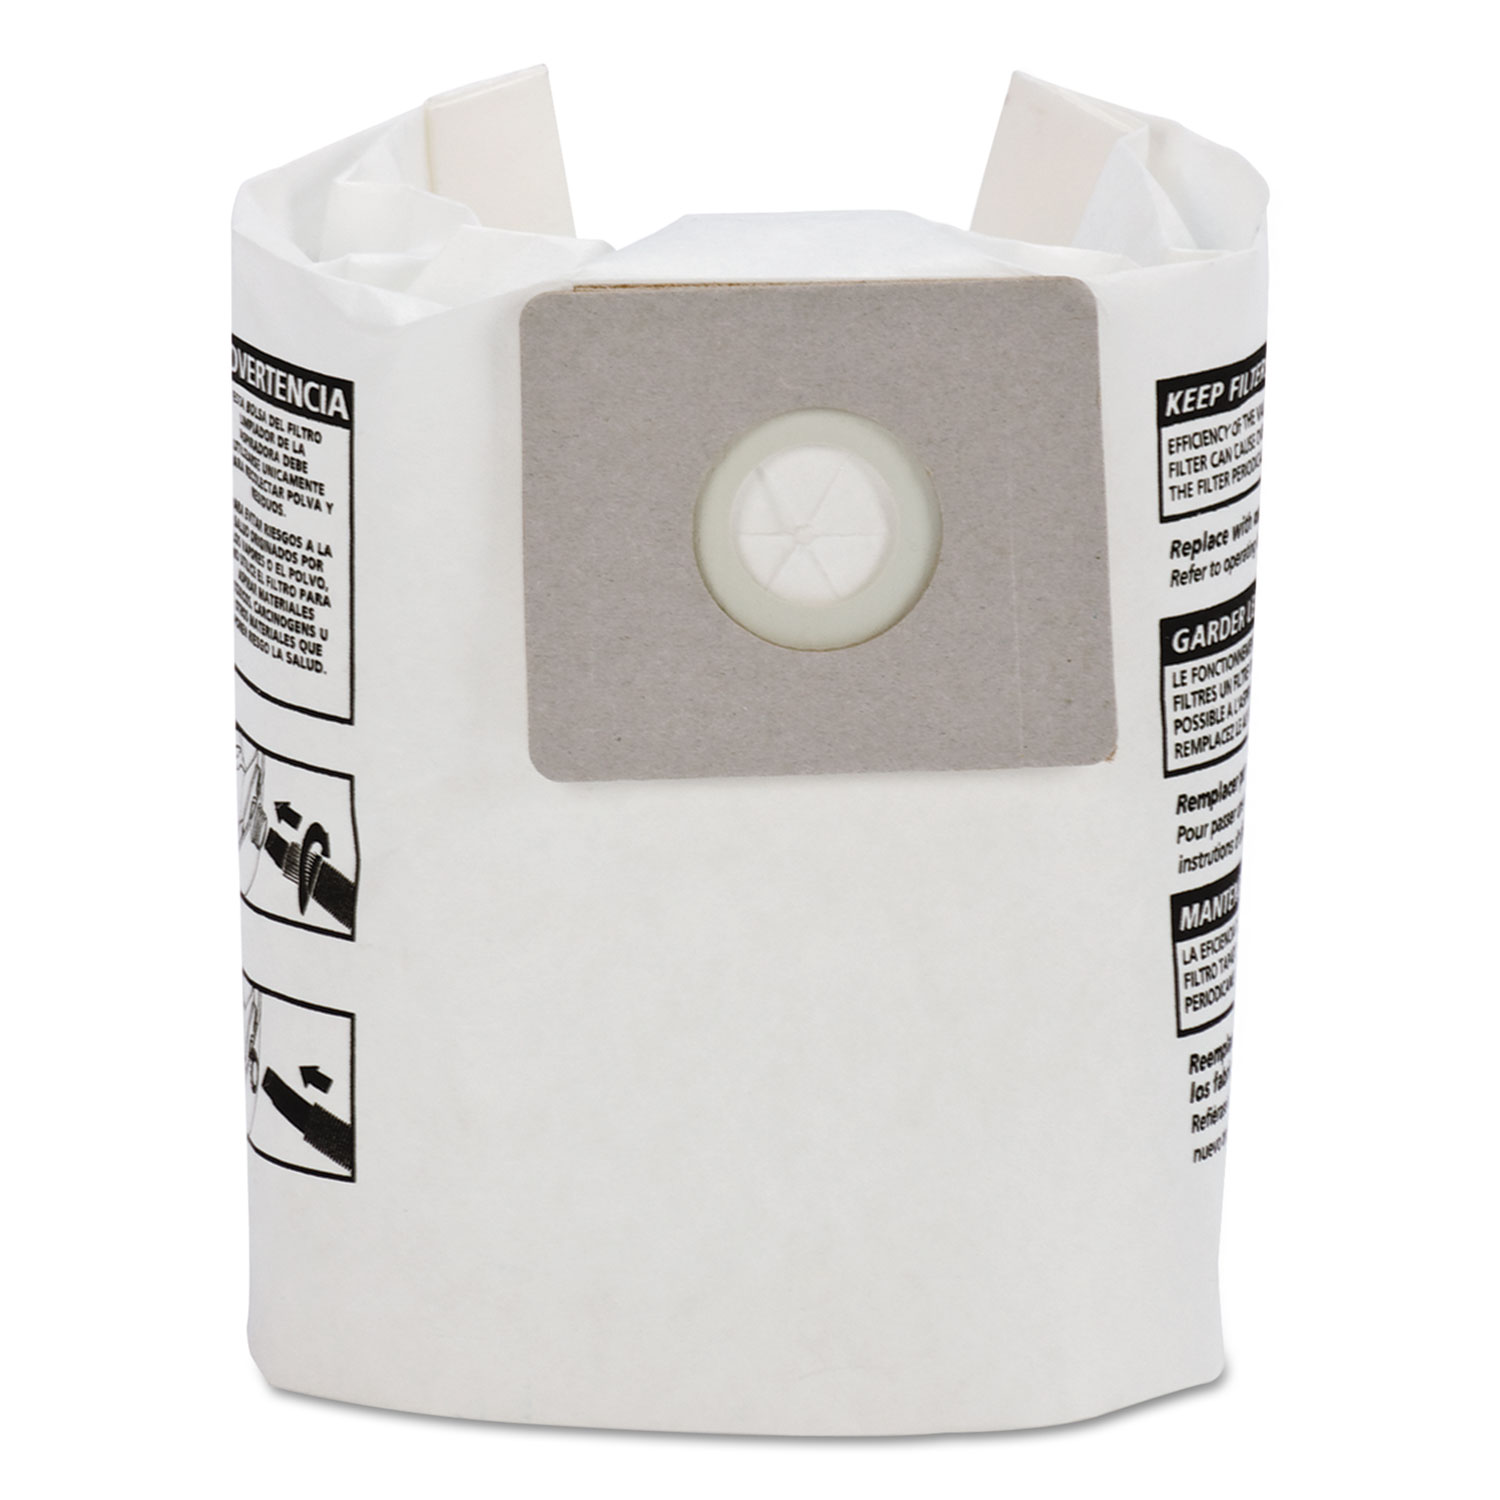  Shop-Vac 9066800 Disposable Collection Filter Bags, Fits 2-2.5 gallon Tanks, 3/Pack (SHO9066800) 